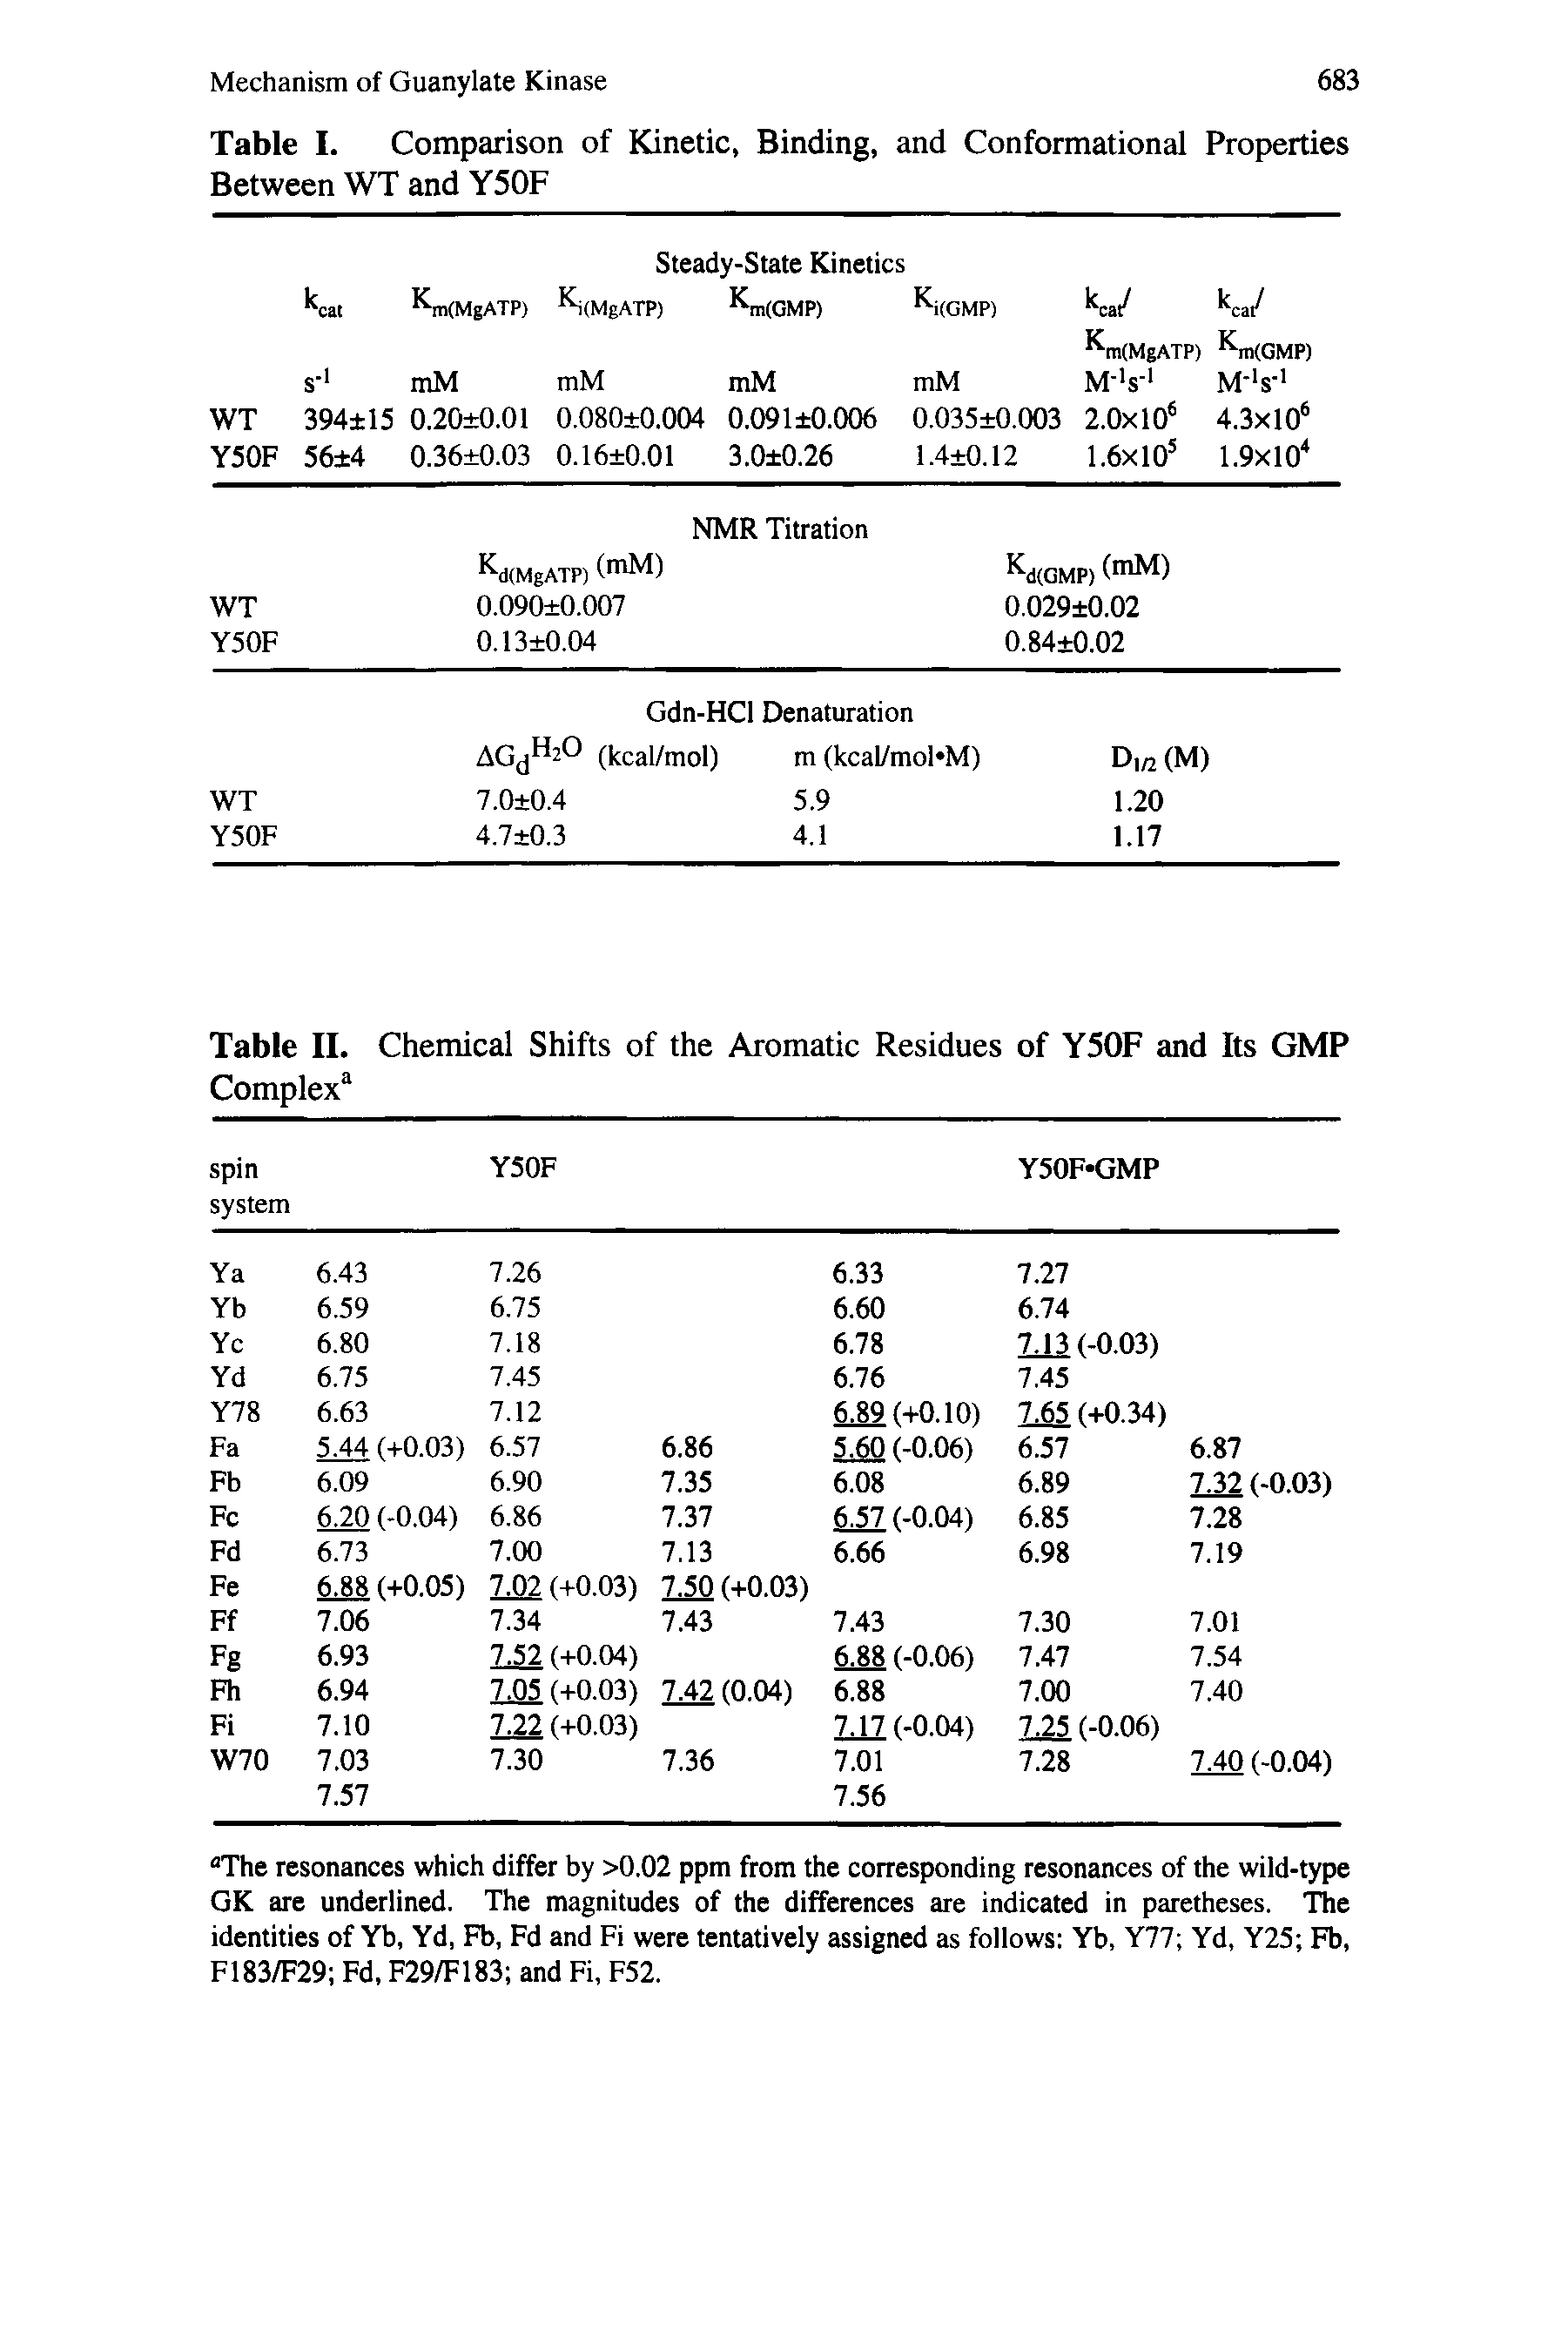 Table I. Comparison of Kinetic, Binding, and Conformational Properties Between WT and Y50F...